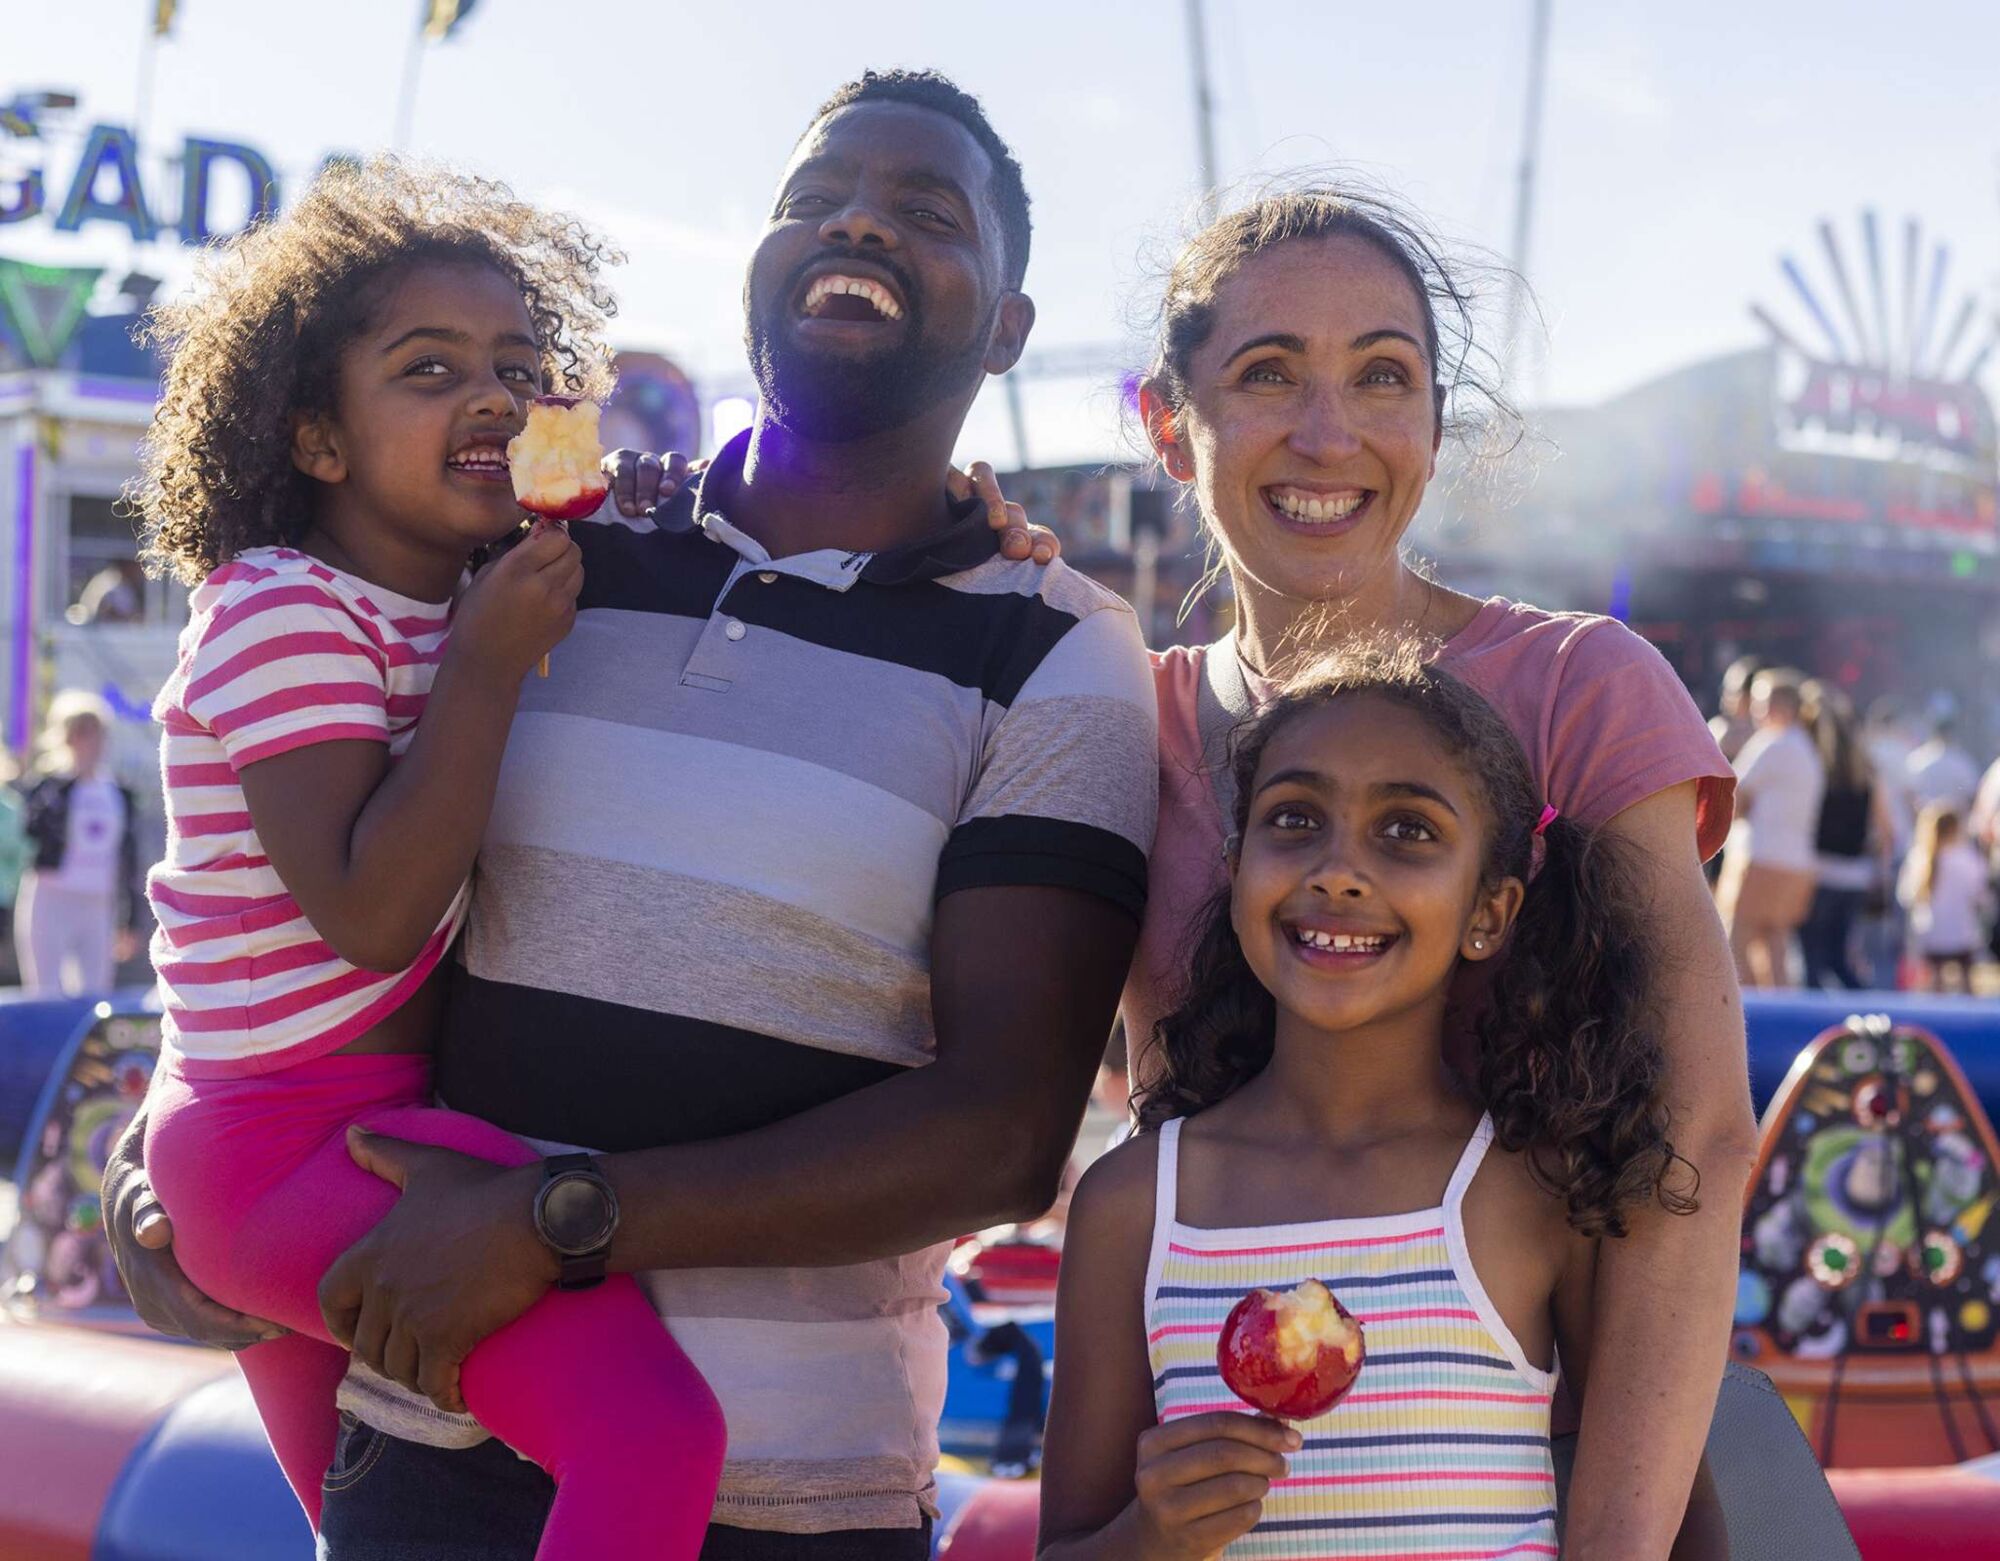 A family of four smiling and eating candy apples at a carnival.